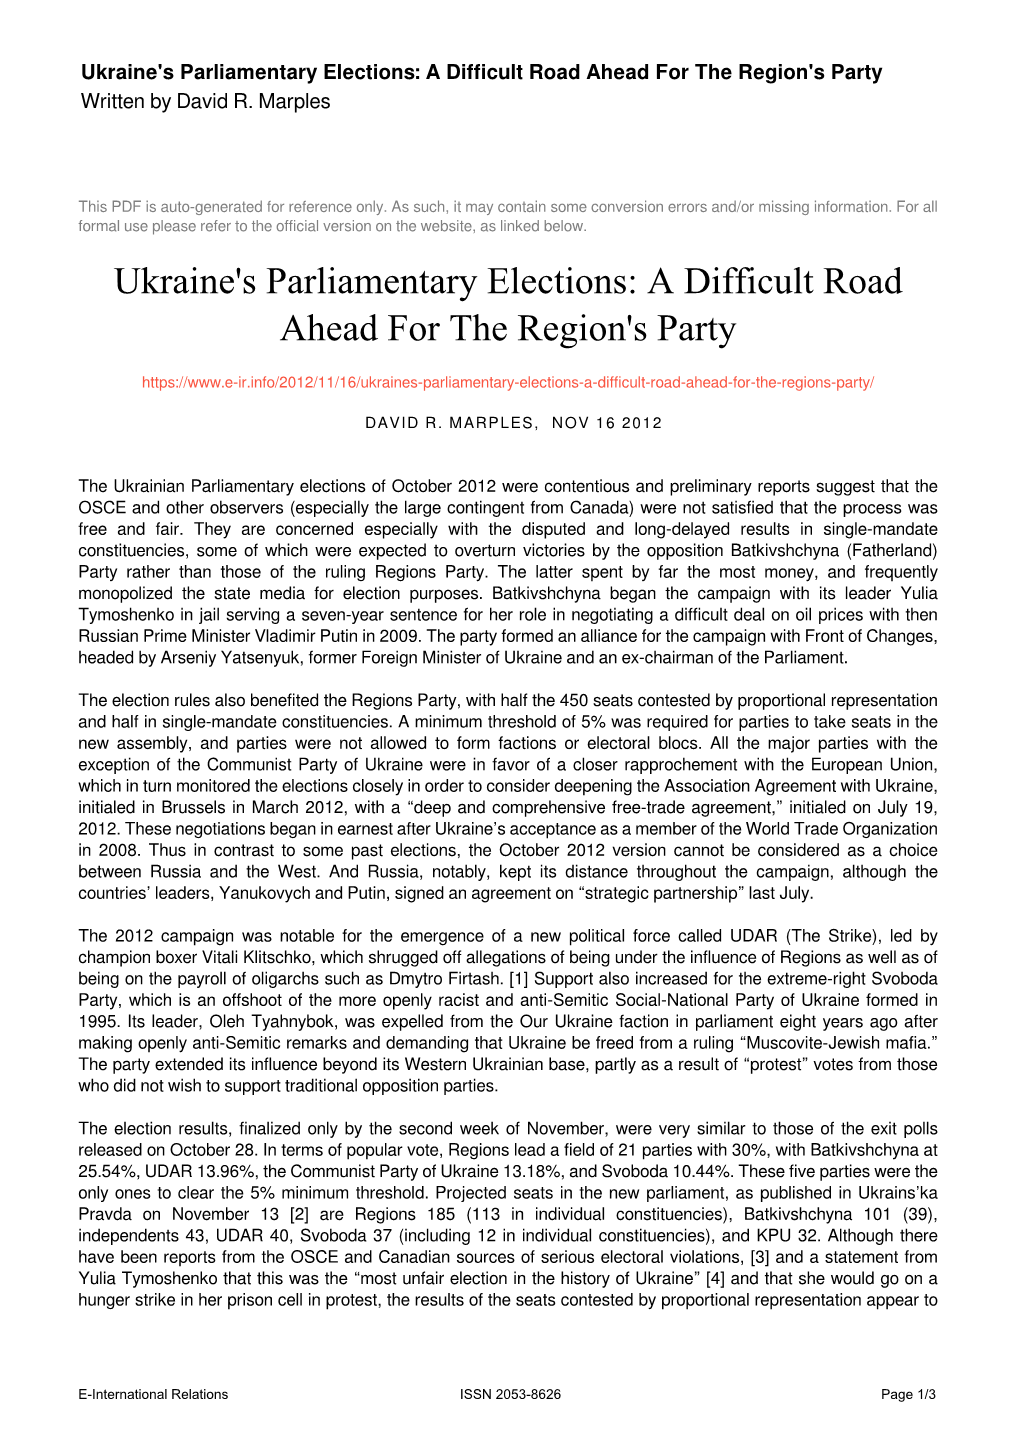 Ukraine's Parliamentary Elections: a Difficult Road Ahead for the Region's Party Written by David R